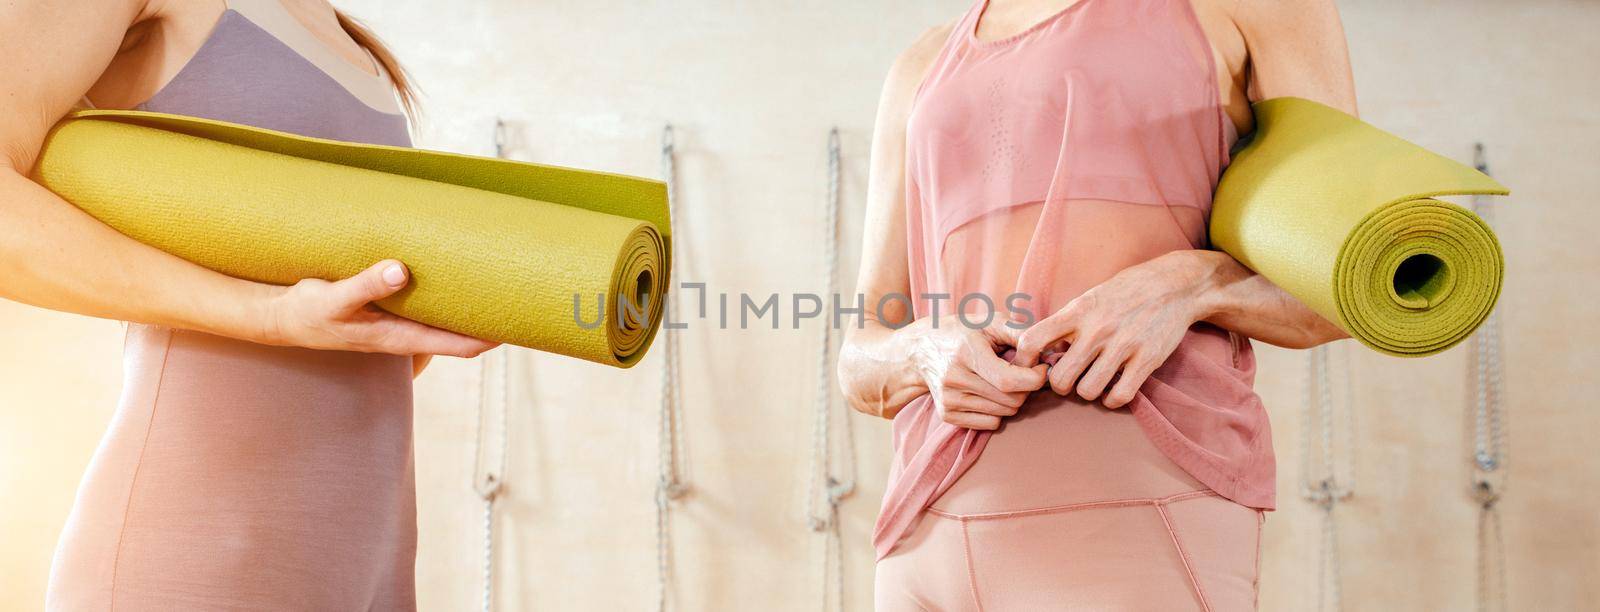 Woman wearing activewear standing in gym holding yoga mat ready start fitness or yoga training. Concept of sports lifestyle. Yoga concept